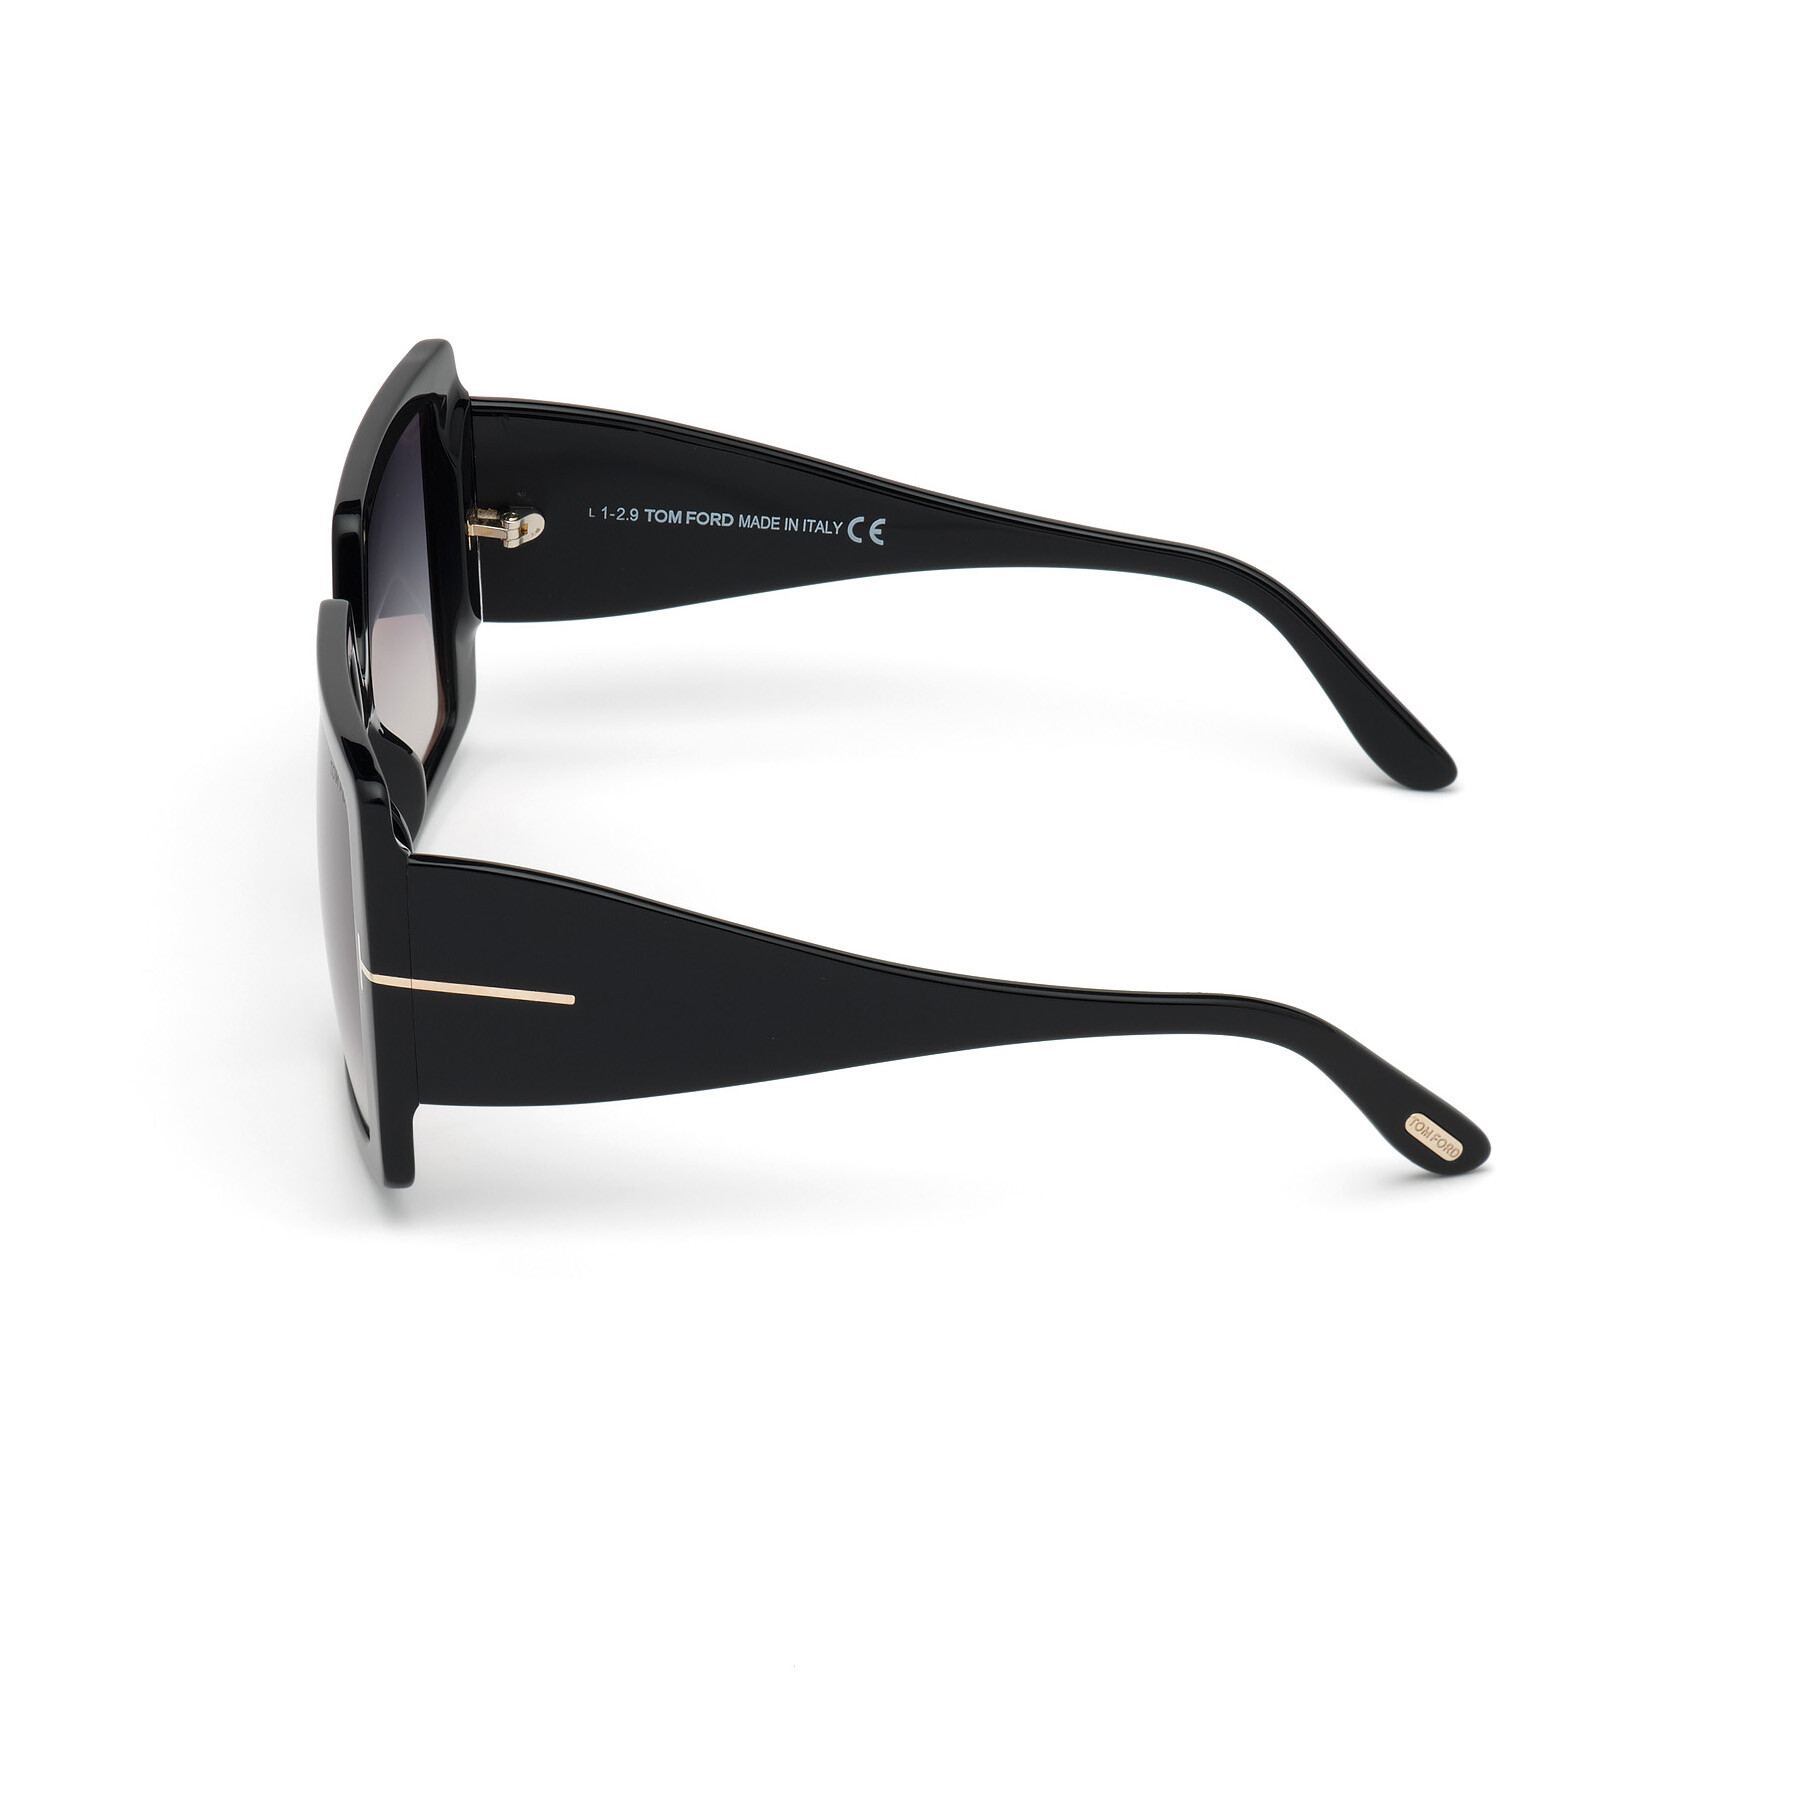 TOM FORD SUNGLASSES – lestyle